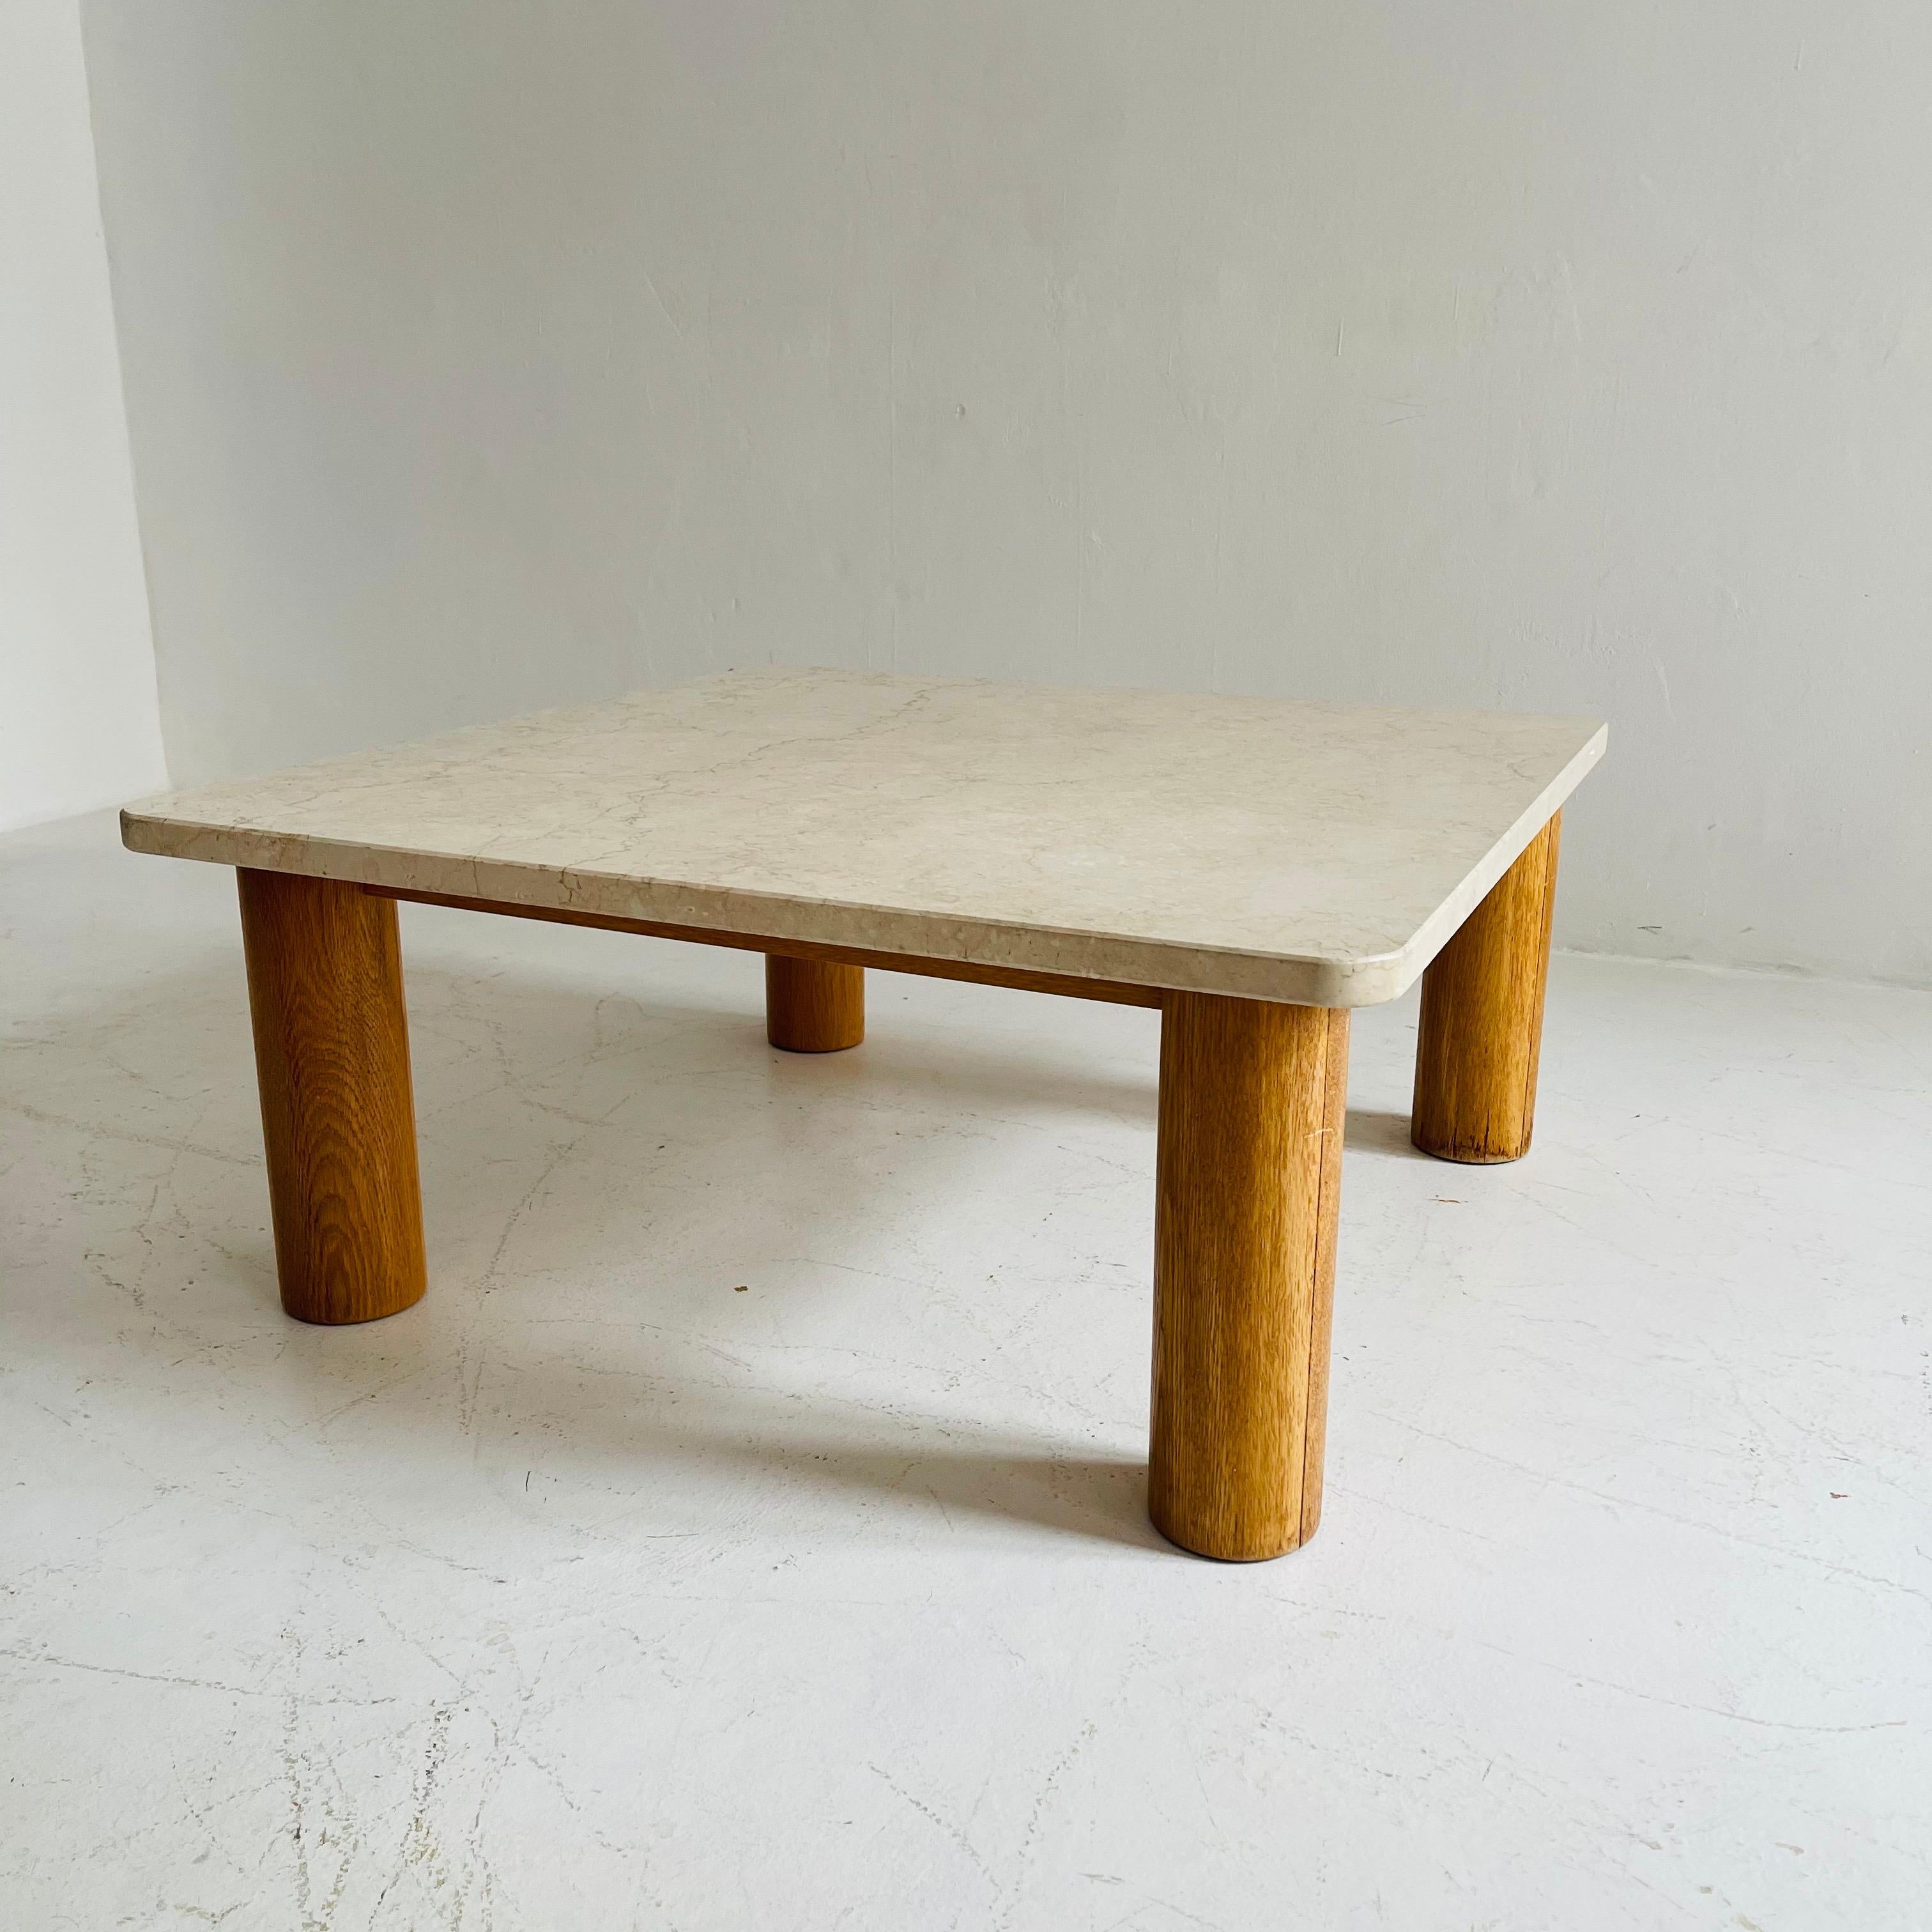 Travertine Coffee Table Style of Charlotte Perriand, France, 1960s.